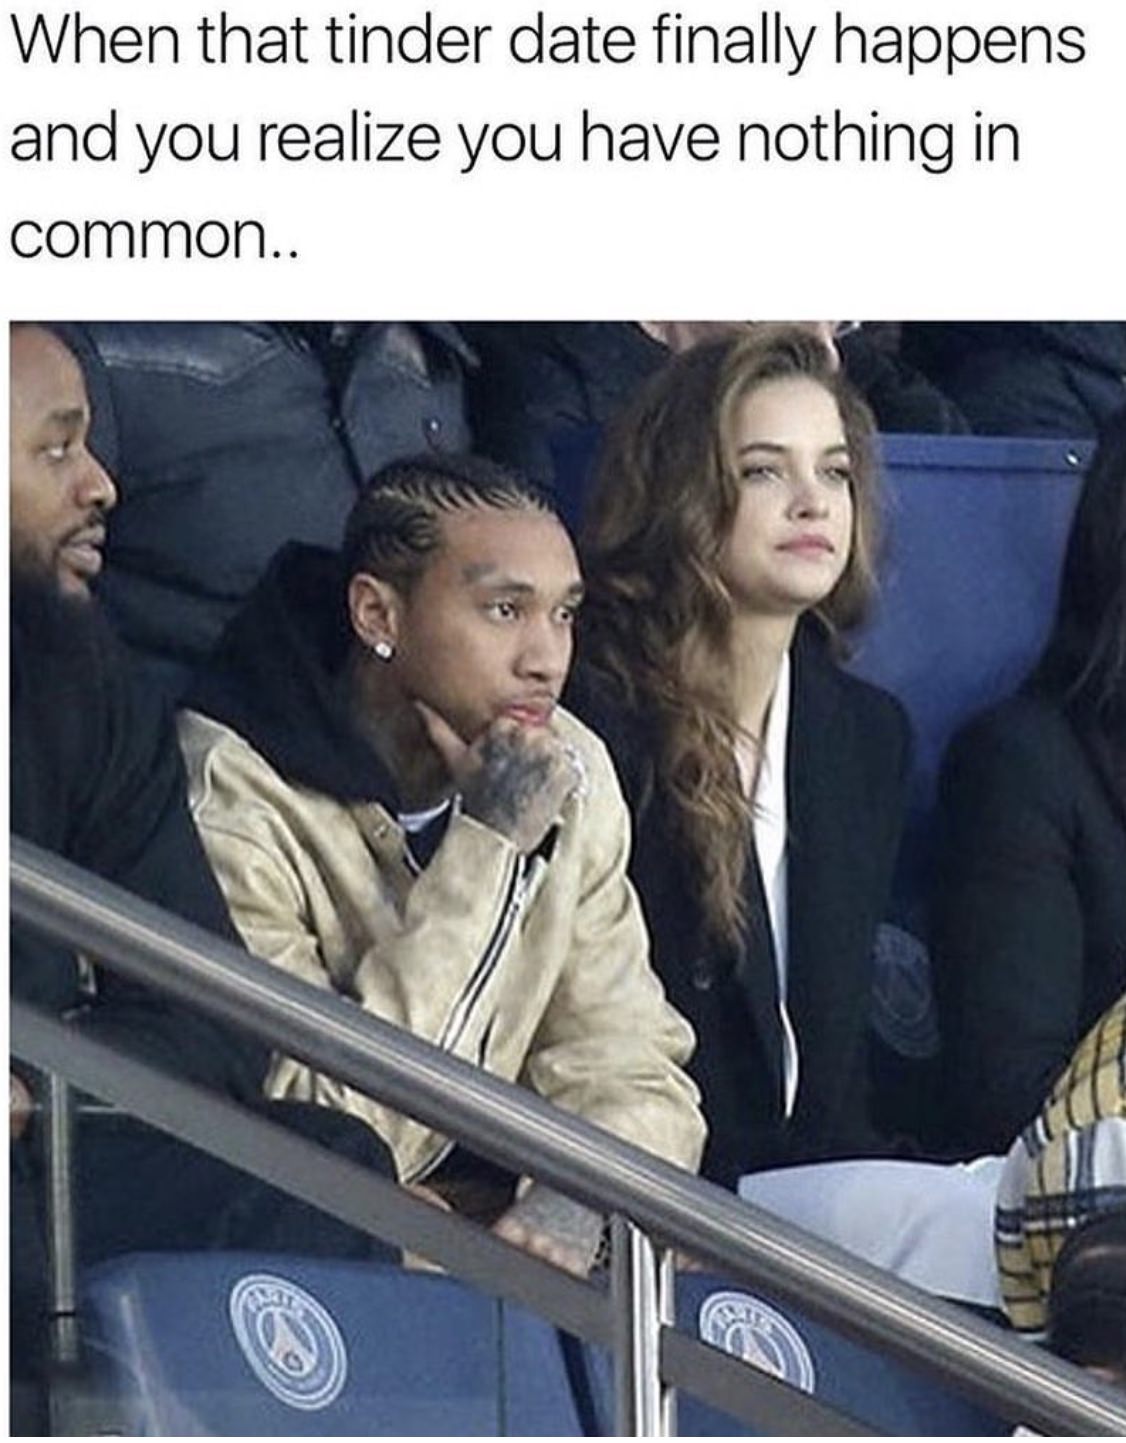 tyga and barbara palvin - When that tinder date finally happens and you realize you have nothing in common..